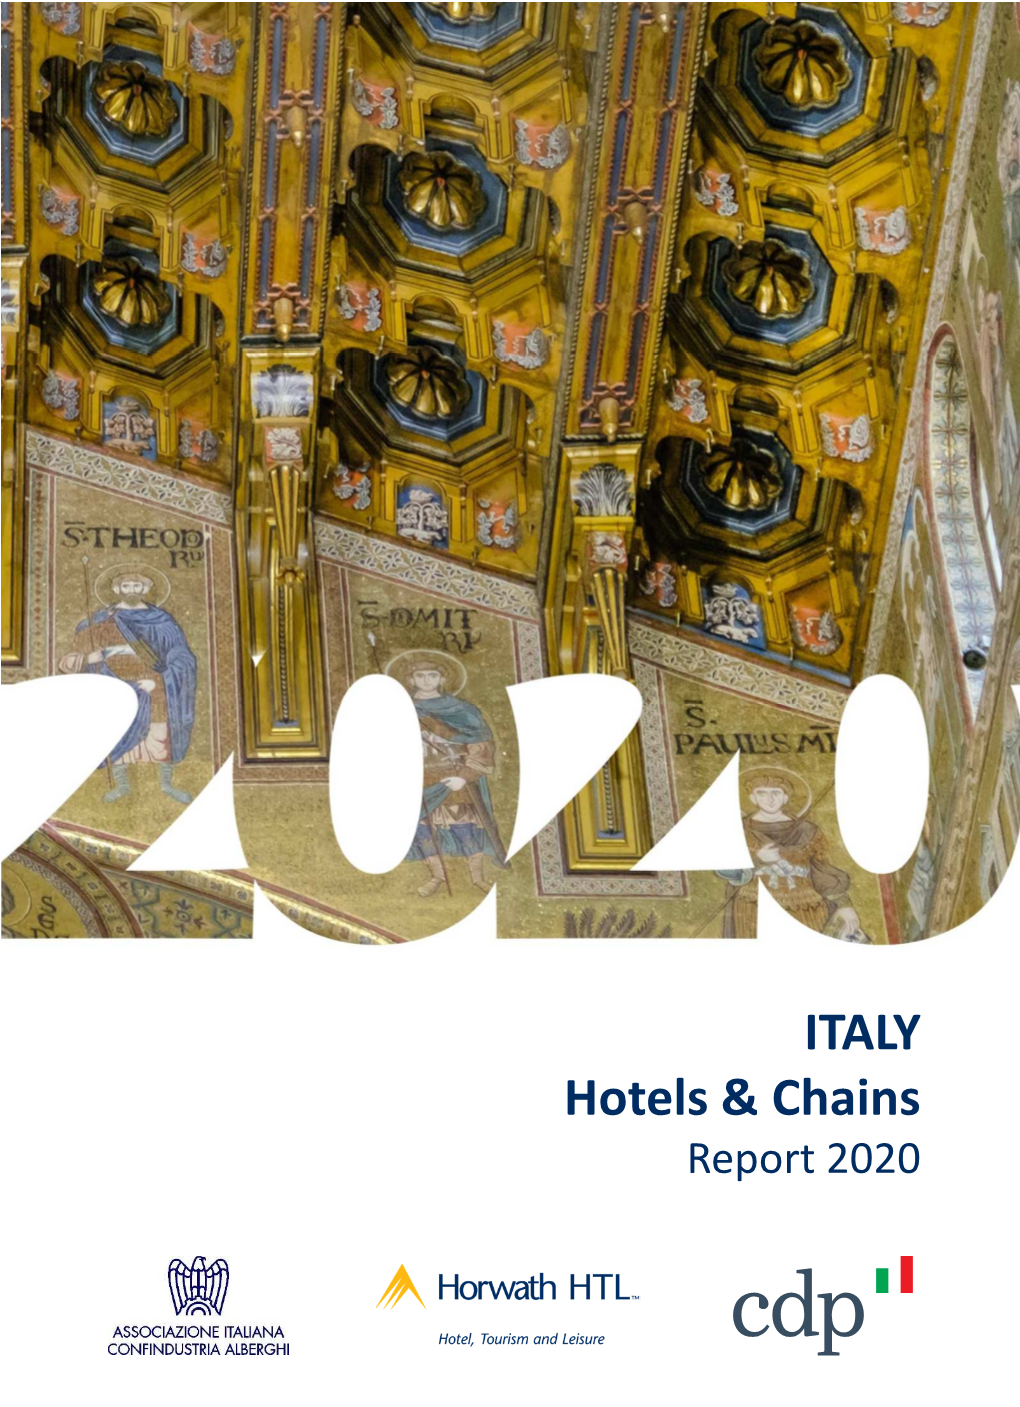 Hotels & Chains in Italy 2020